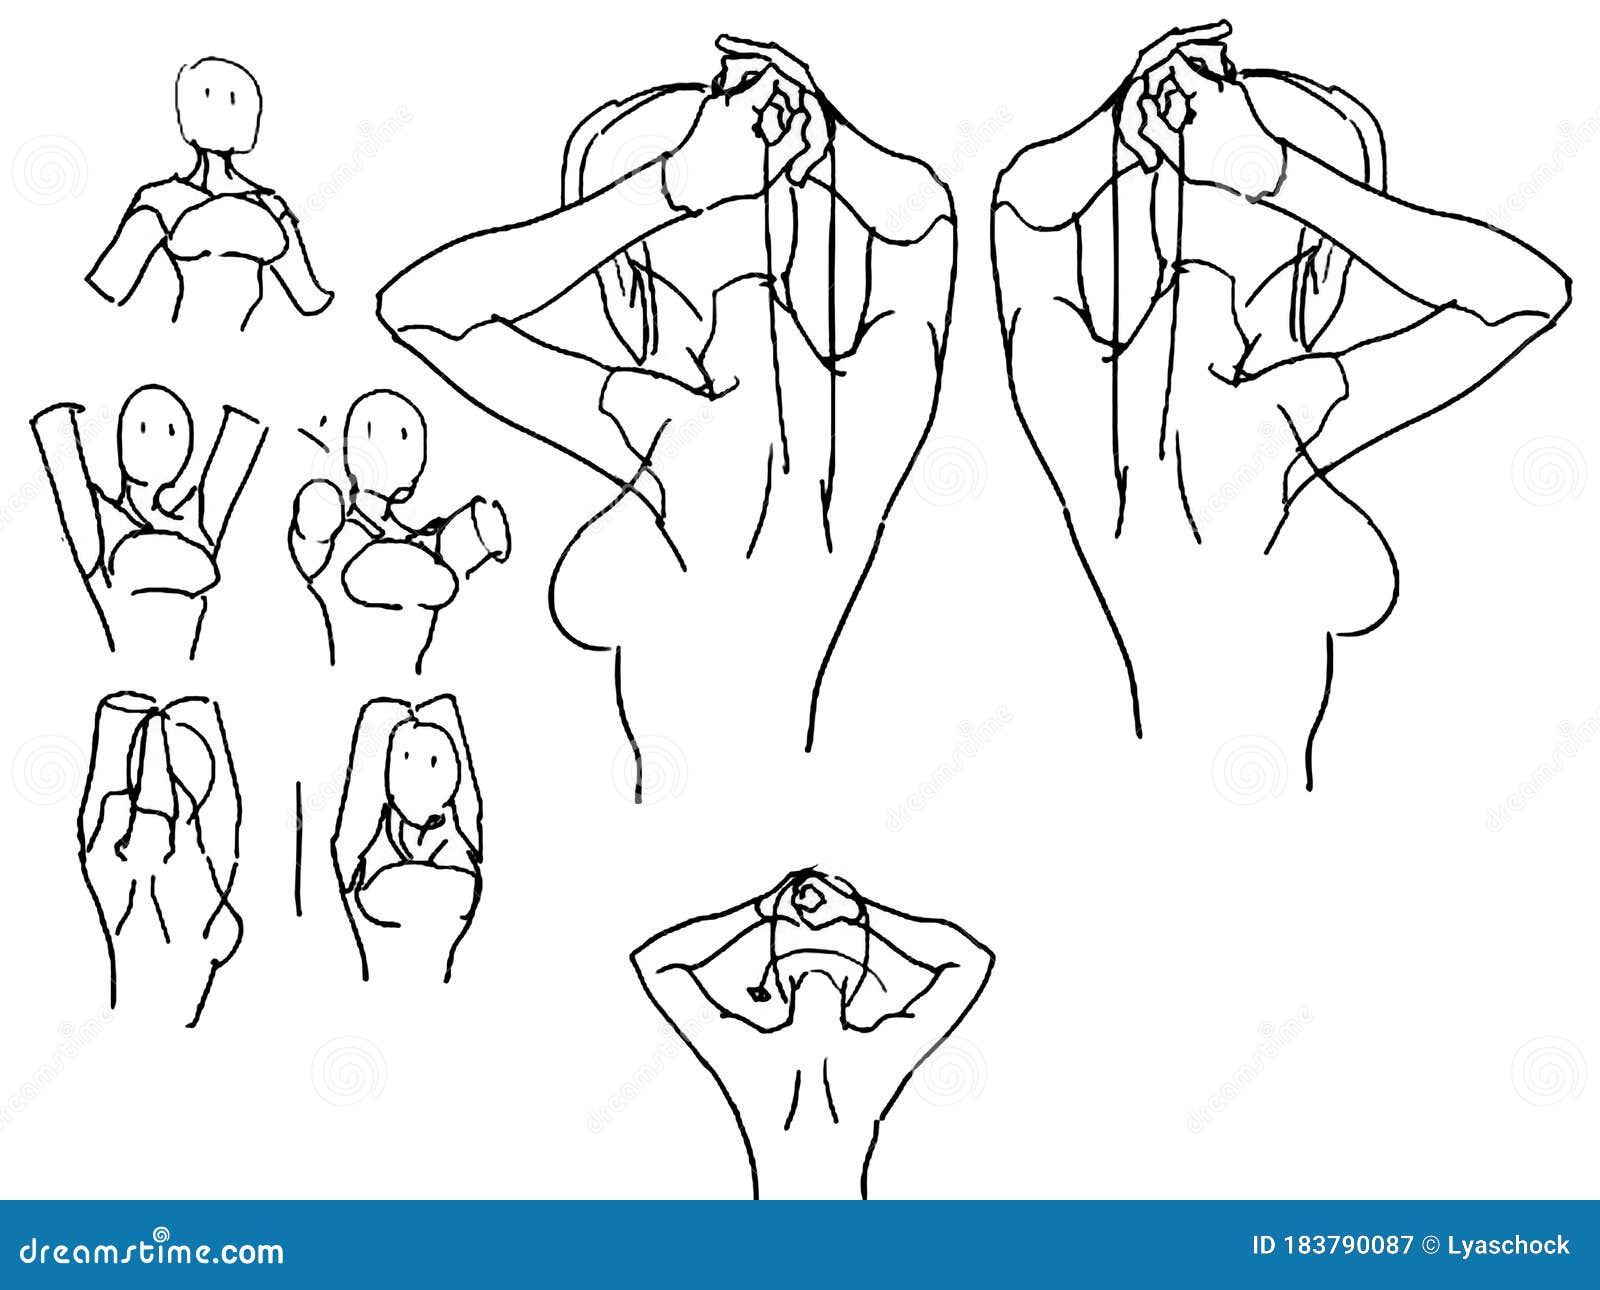 Tutorial Drawing Female Body Drawing Human Body Step Step Lessons